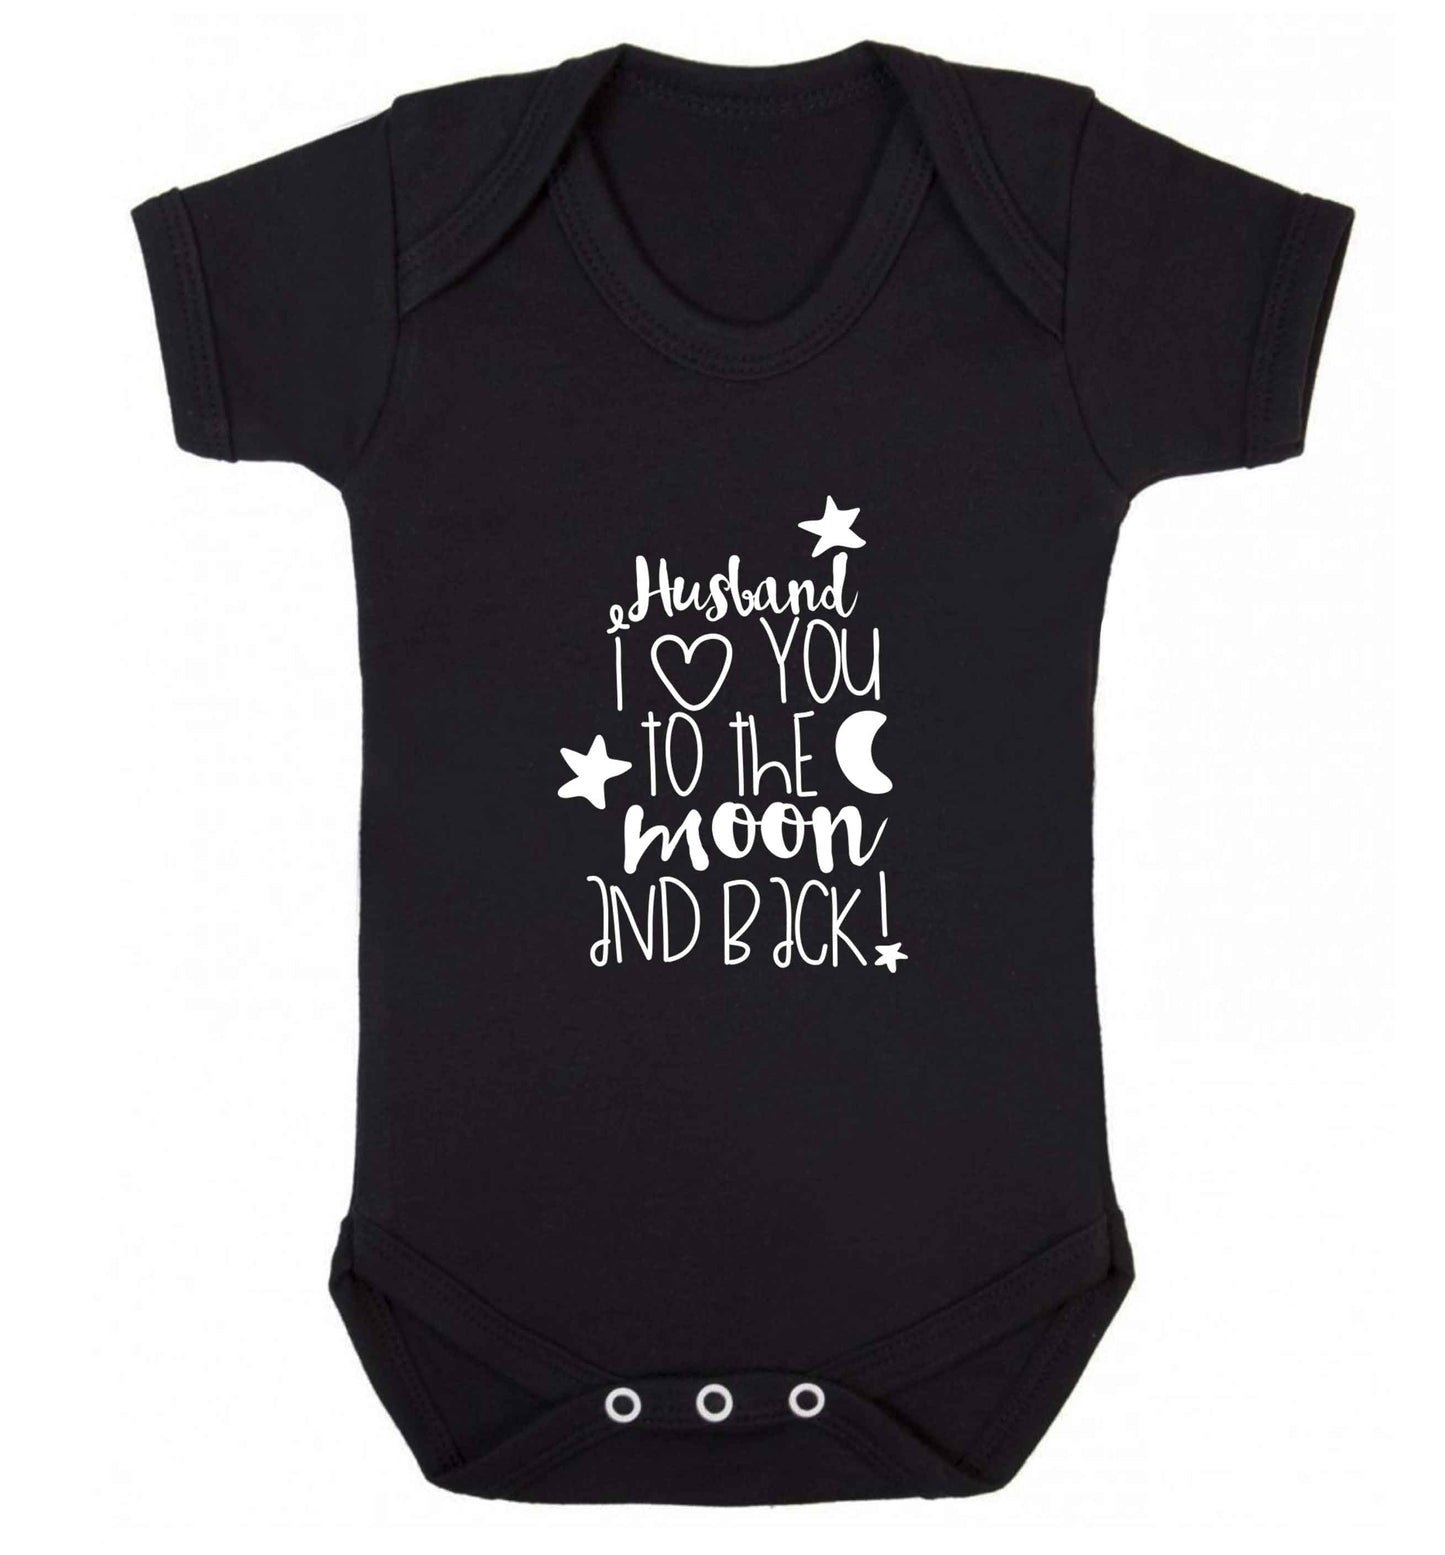 Husband I love you to the moon and back baby vest black 18-24 months